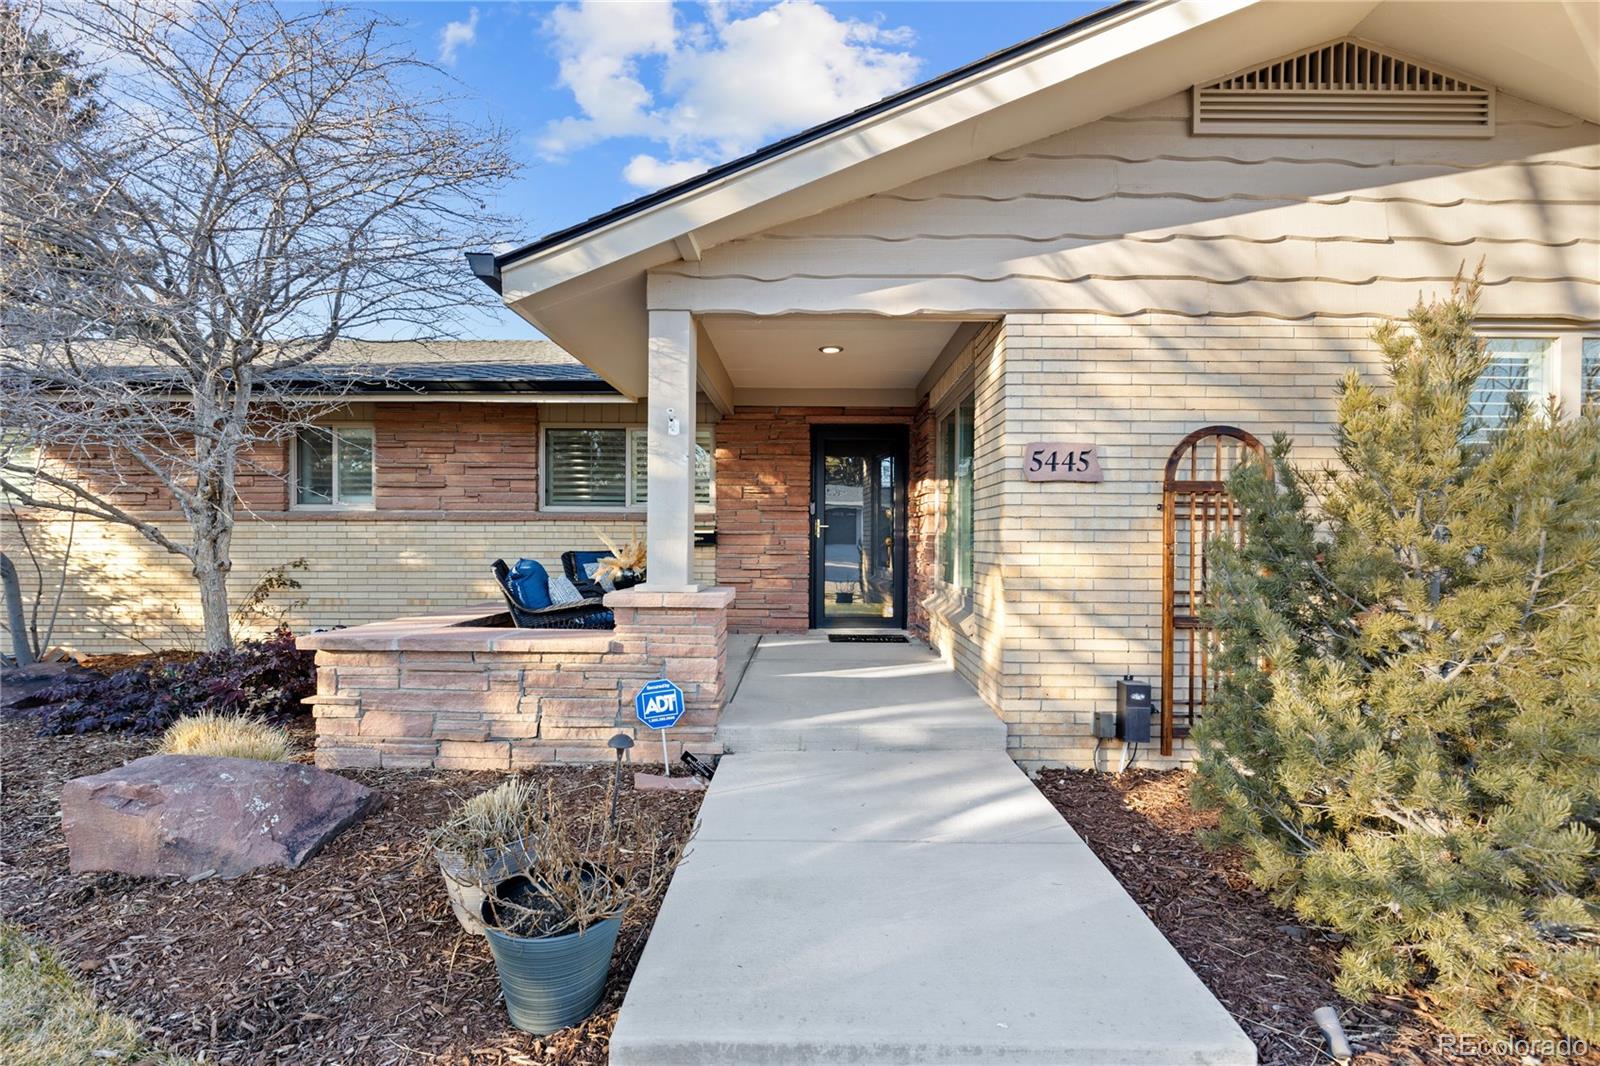 Report Image for 5445 W Plymouth Drive,Littleton, Colorado